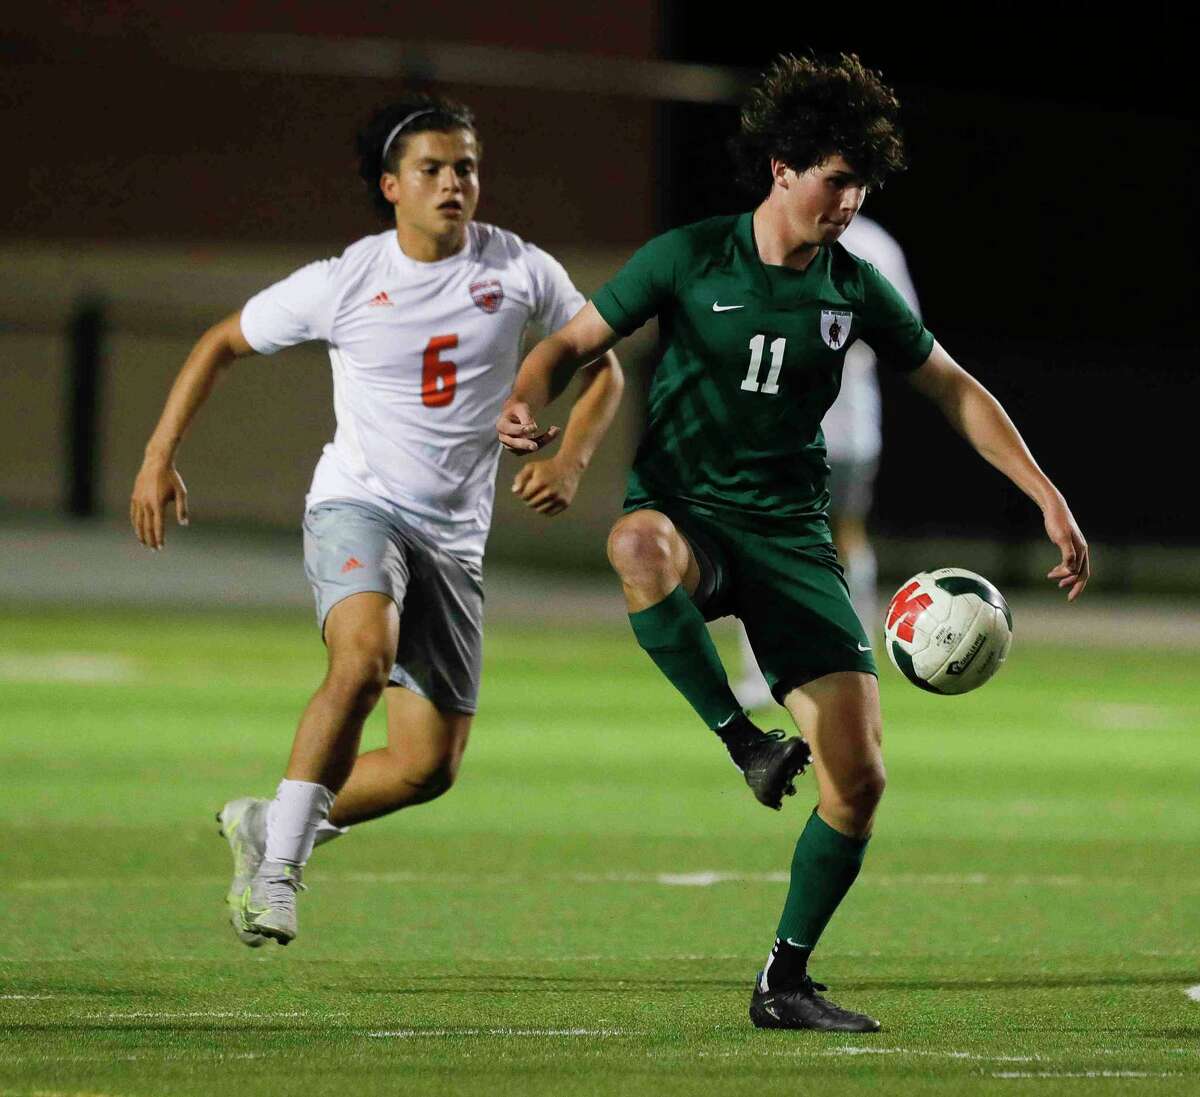 The Woodlands' Cody Tice (11), shown here last week, scored the game winning goal on a penalty kick in the second overtime Friday night against Mansfield Lake Ridge.